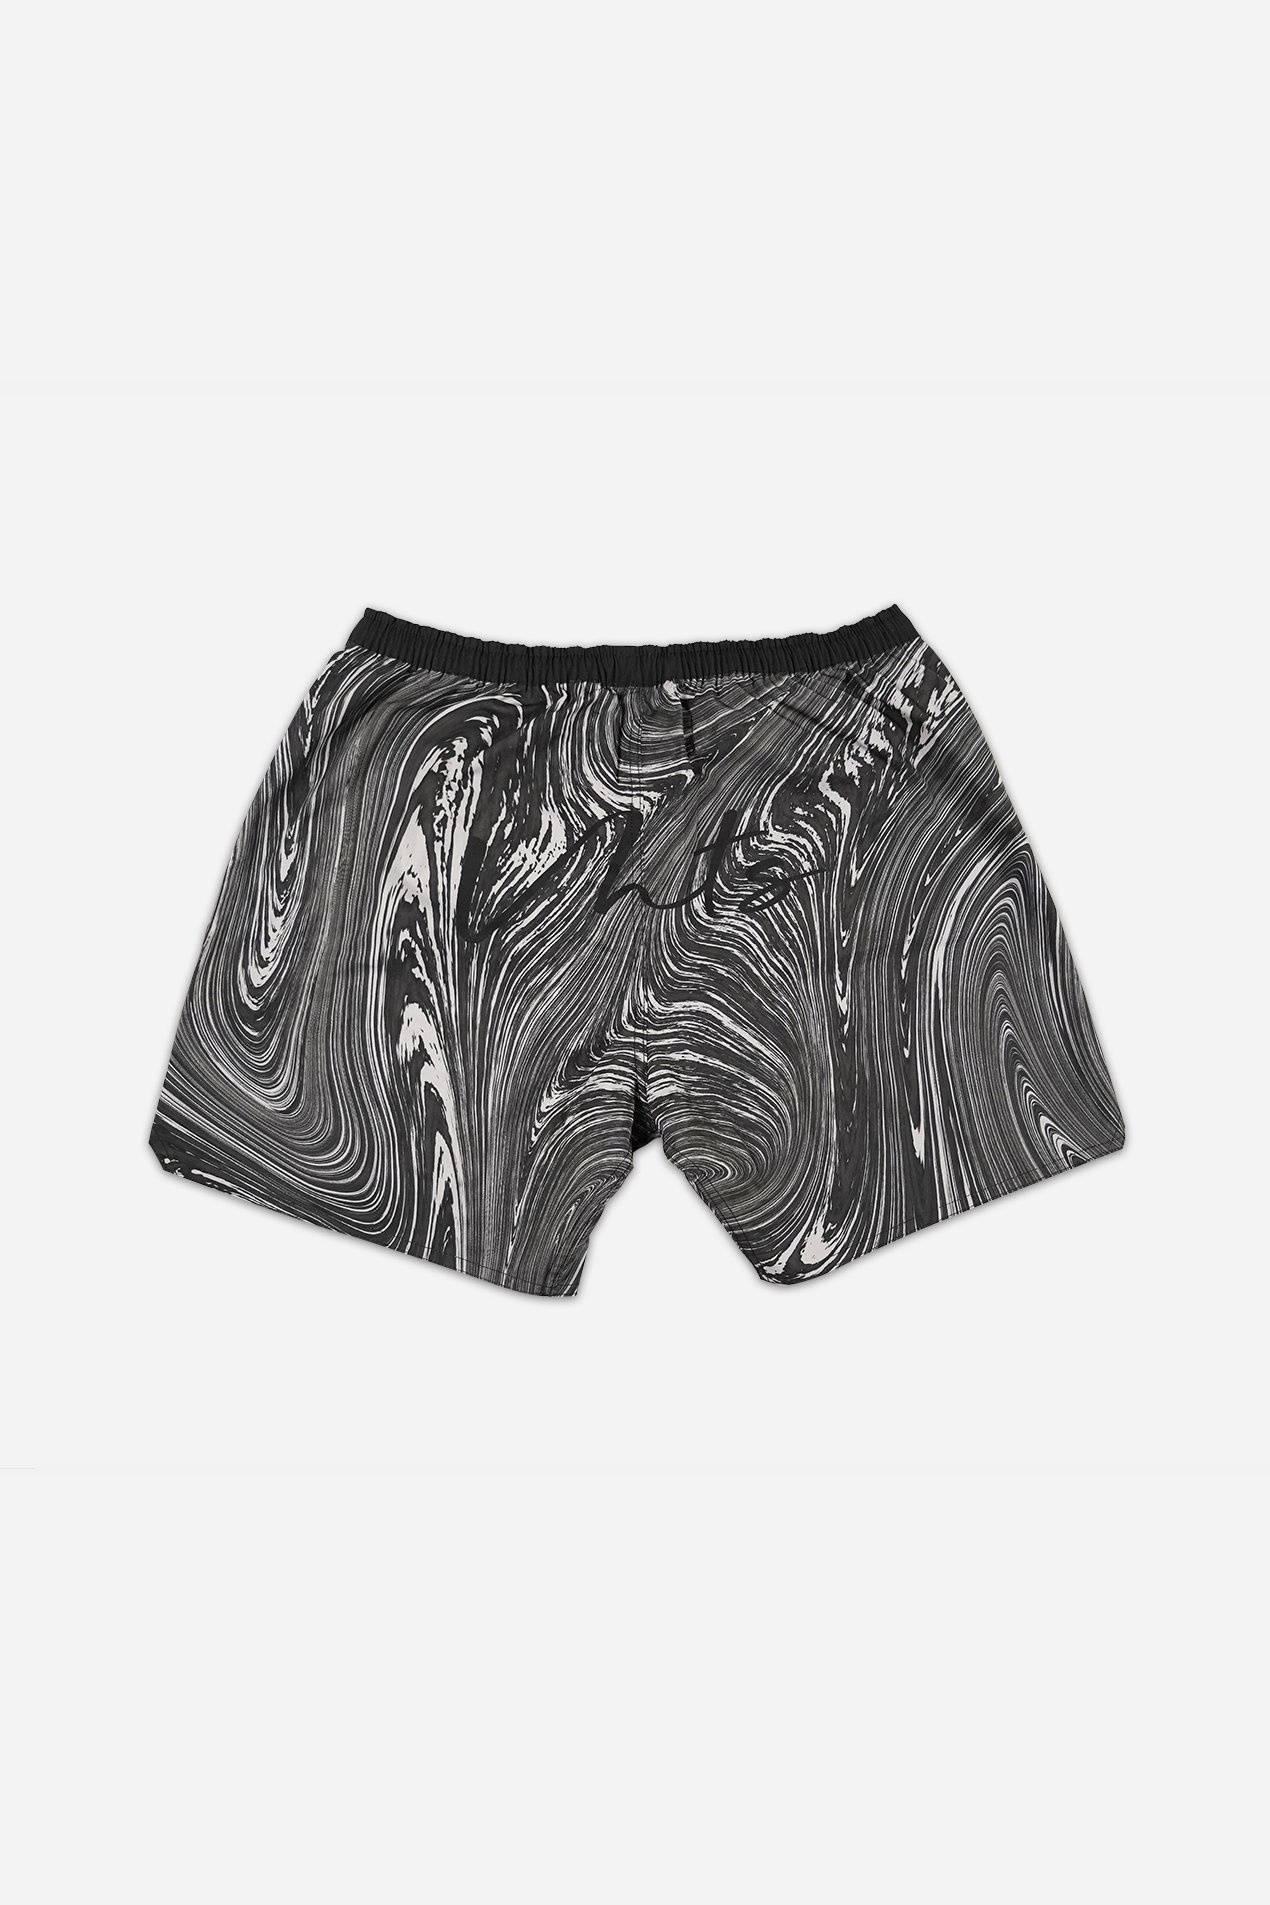 Spring/ Summer 2022 special edition Combat Shorts “Marble” Charcoal | VHTS